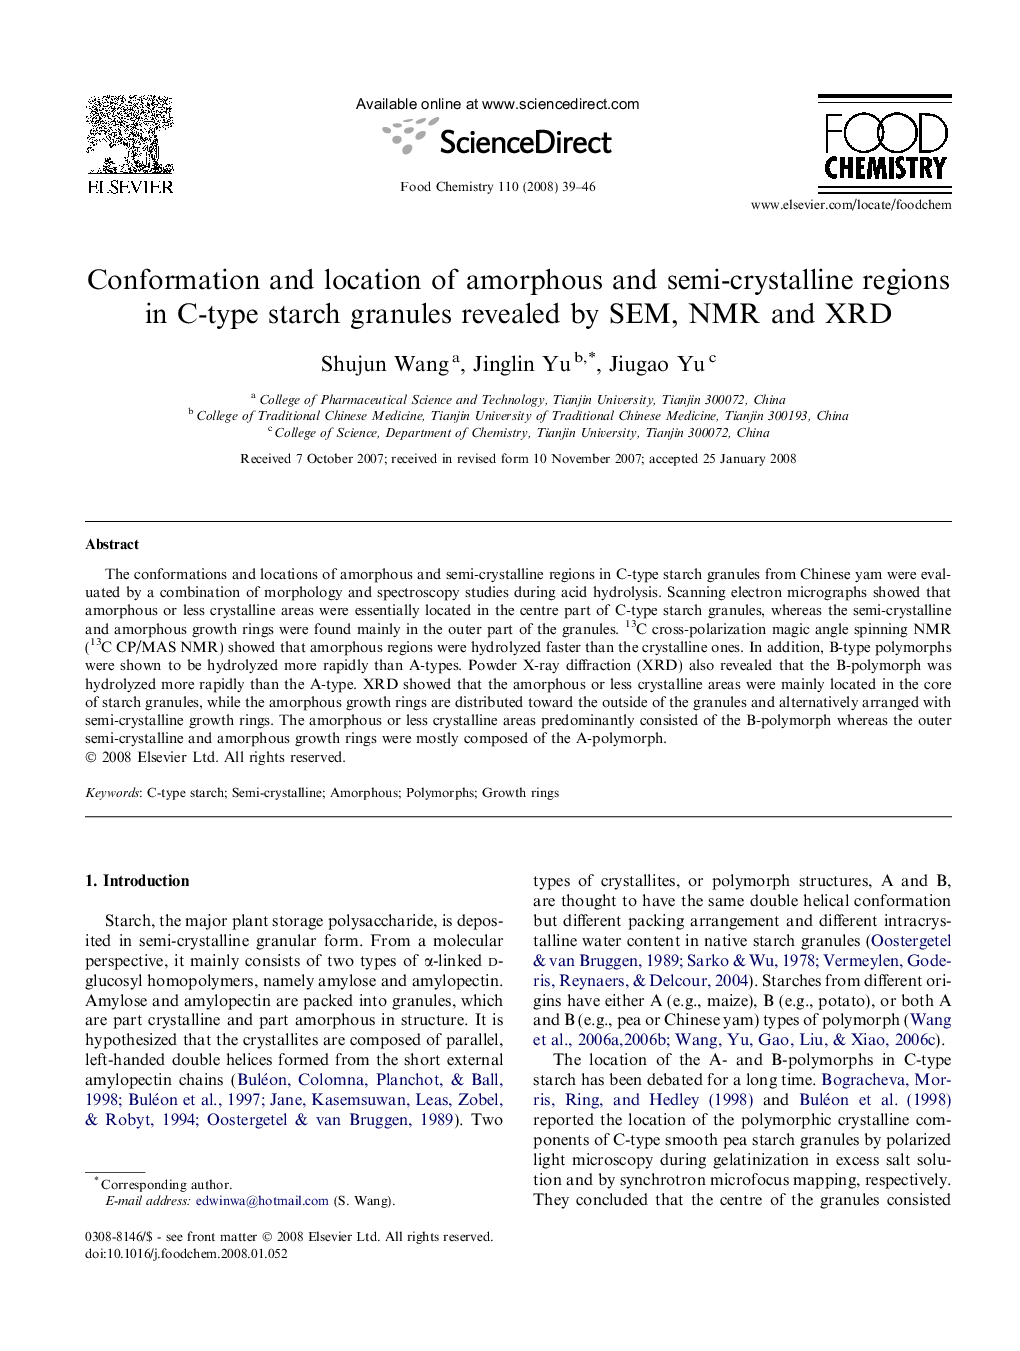 Conformation and location of amorphous and semi-crystalline regions in C-type starch granules revealed by SEM, NMR and XRD